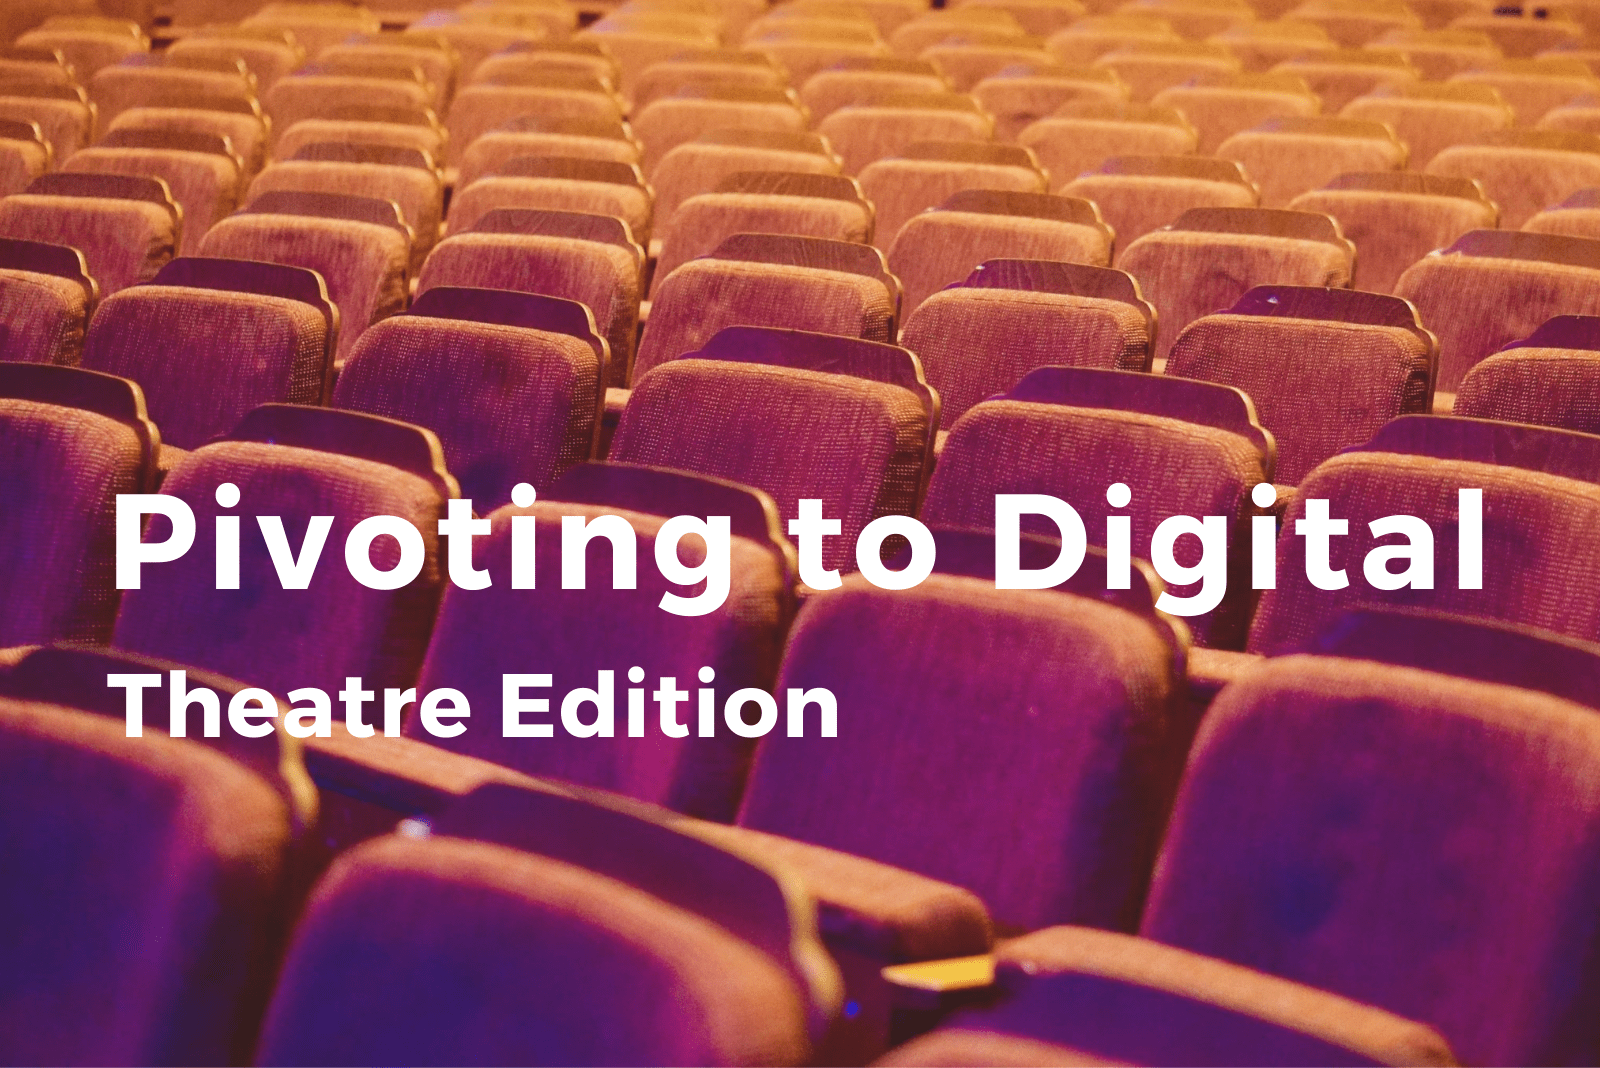 Pivoting to Digital - Theatre Edition. White text on a background image of red theatre seating.